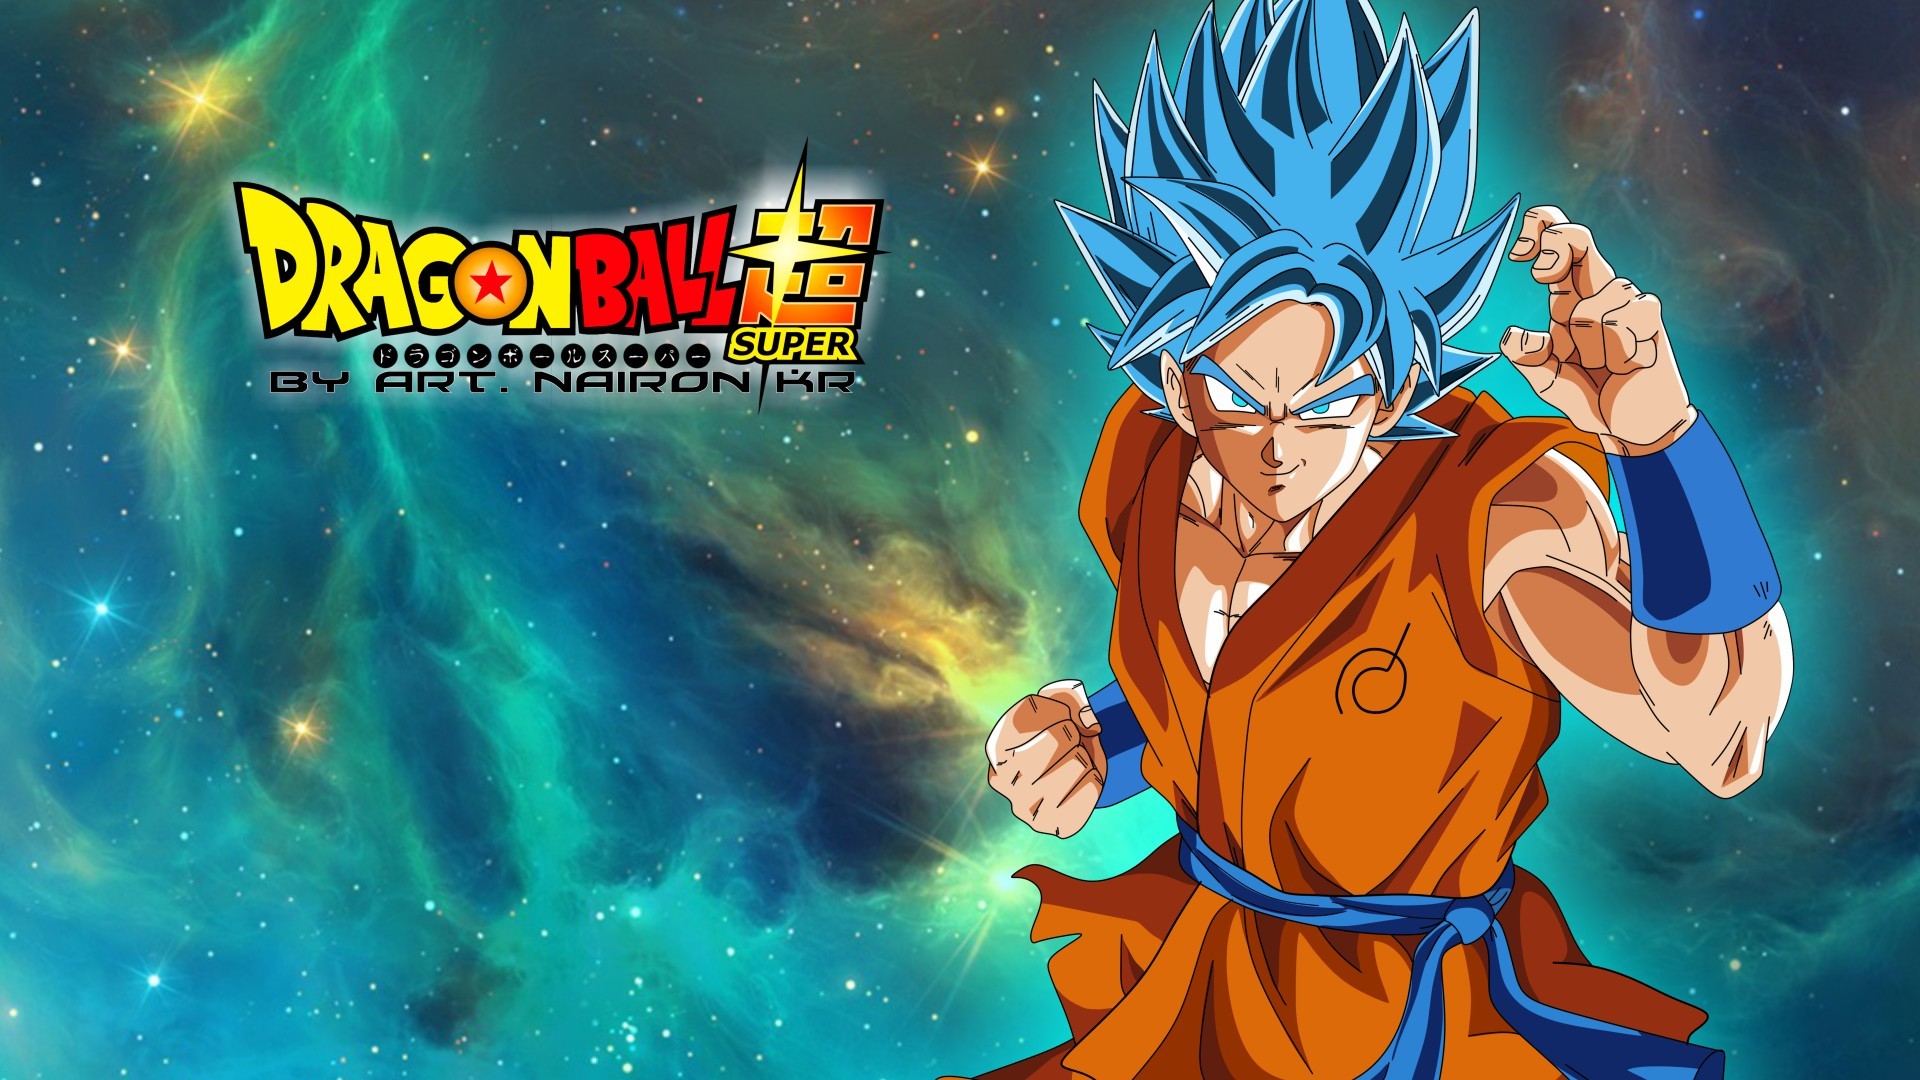 Goku SSJ Blue Wallpaper HD With Resolution 1920X1080 pixel. You can make this wallpaper for your Desktop Computer Backgrounds, Mac Wallpapers, Android Lock screen or iPhone Screensavers